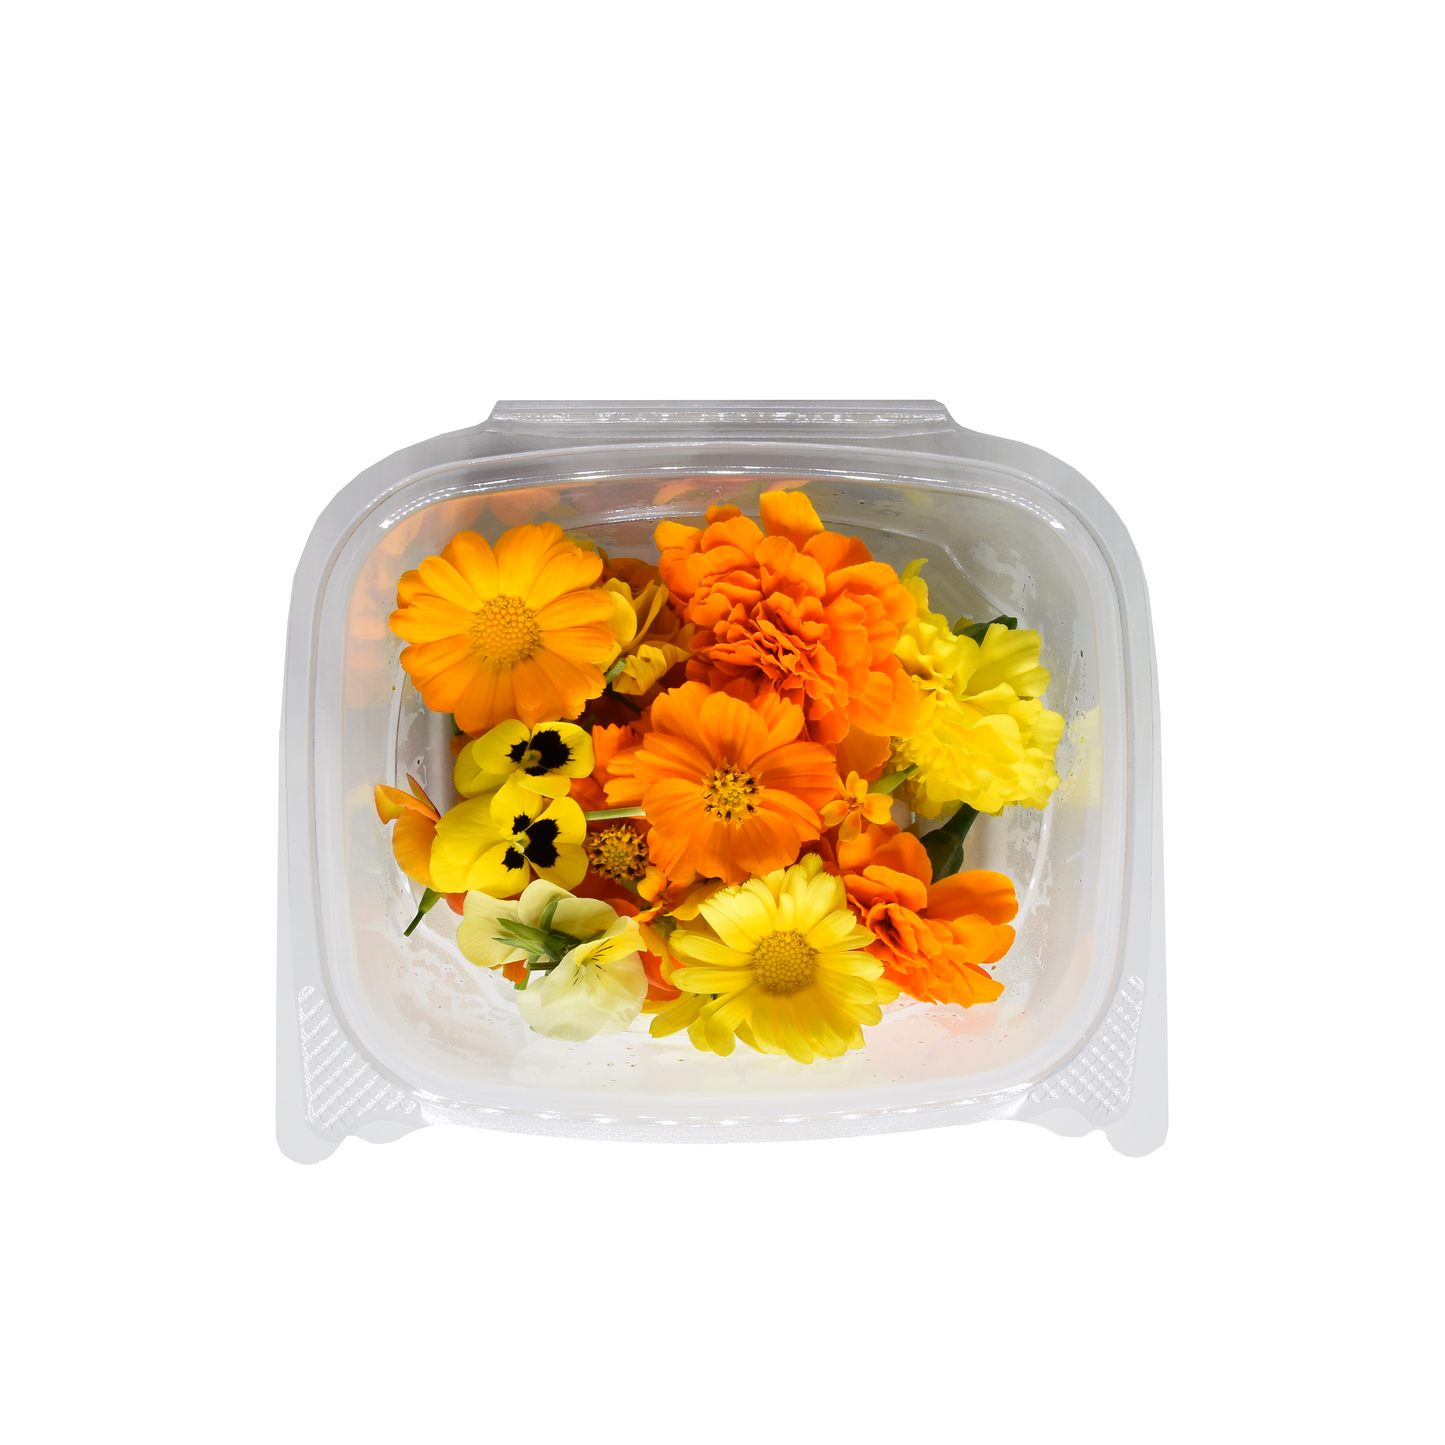 [NEW] Colour Collection - Edible Flowers Mix Bloom Box